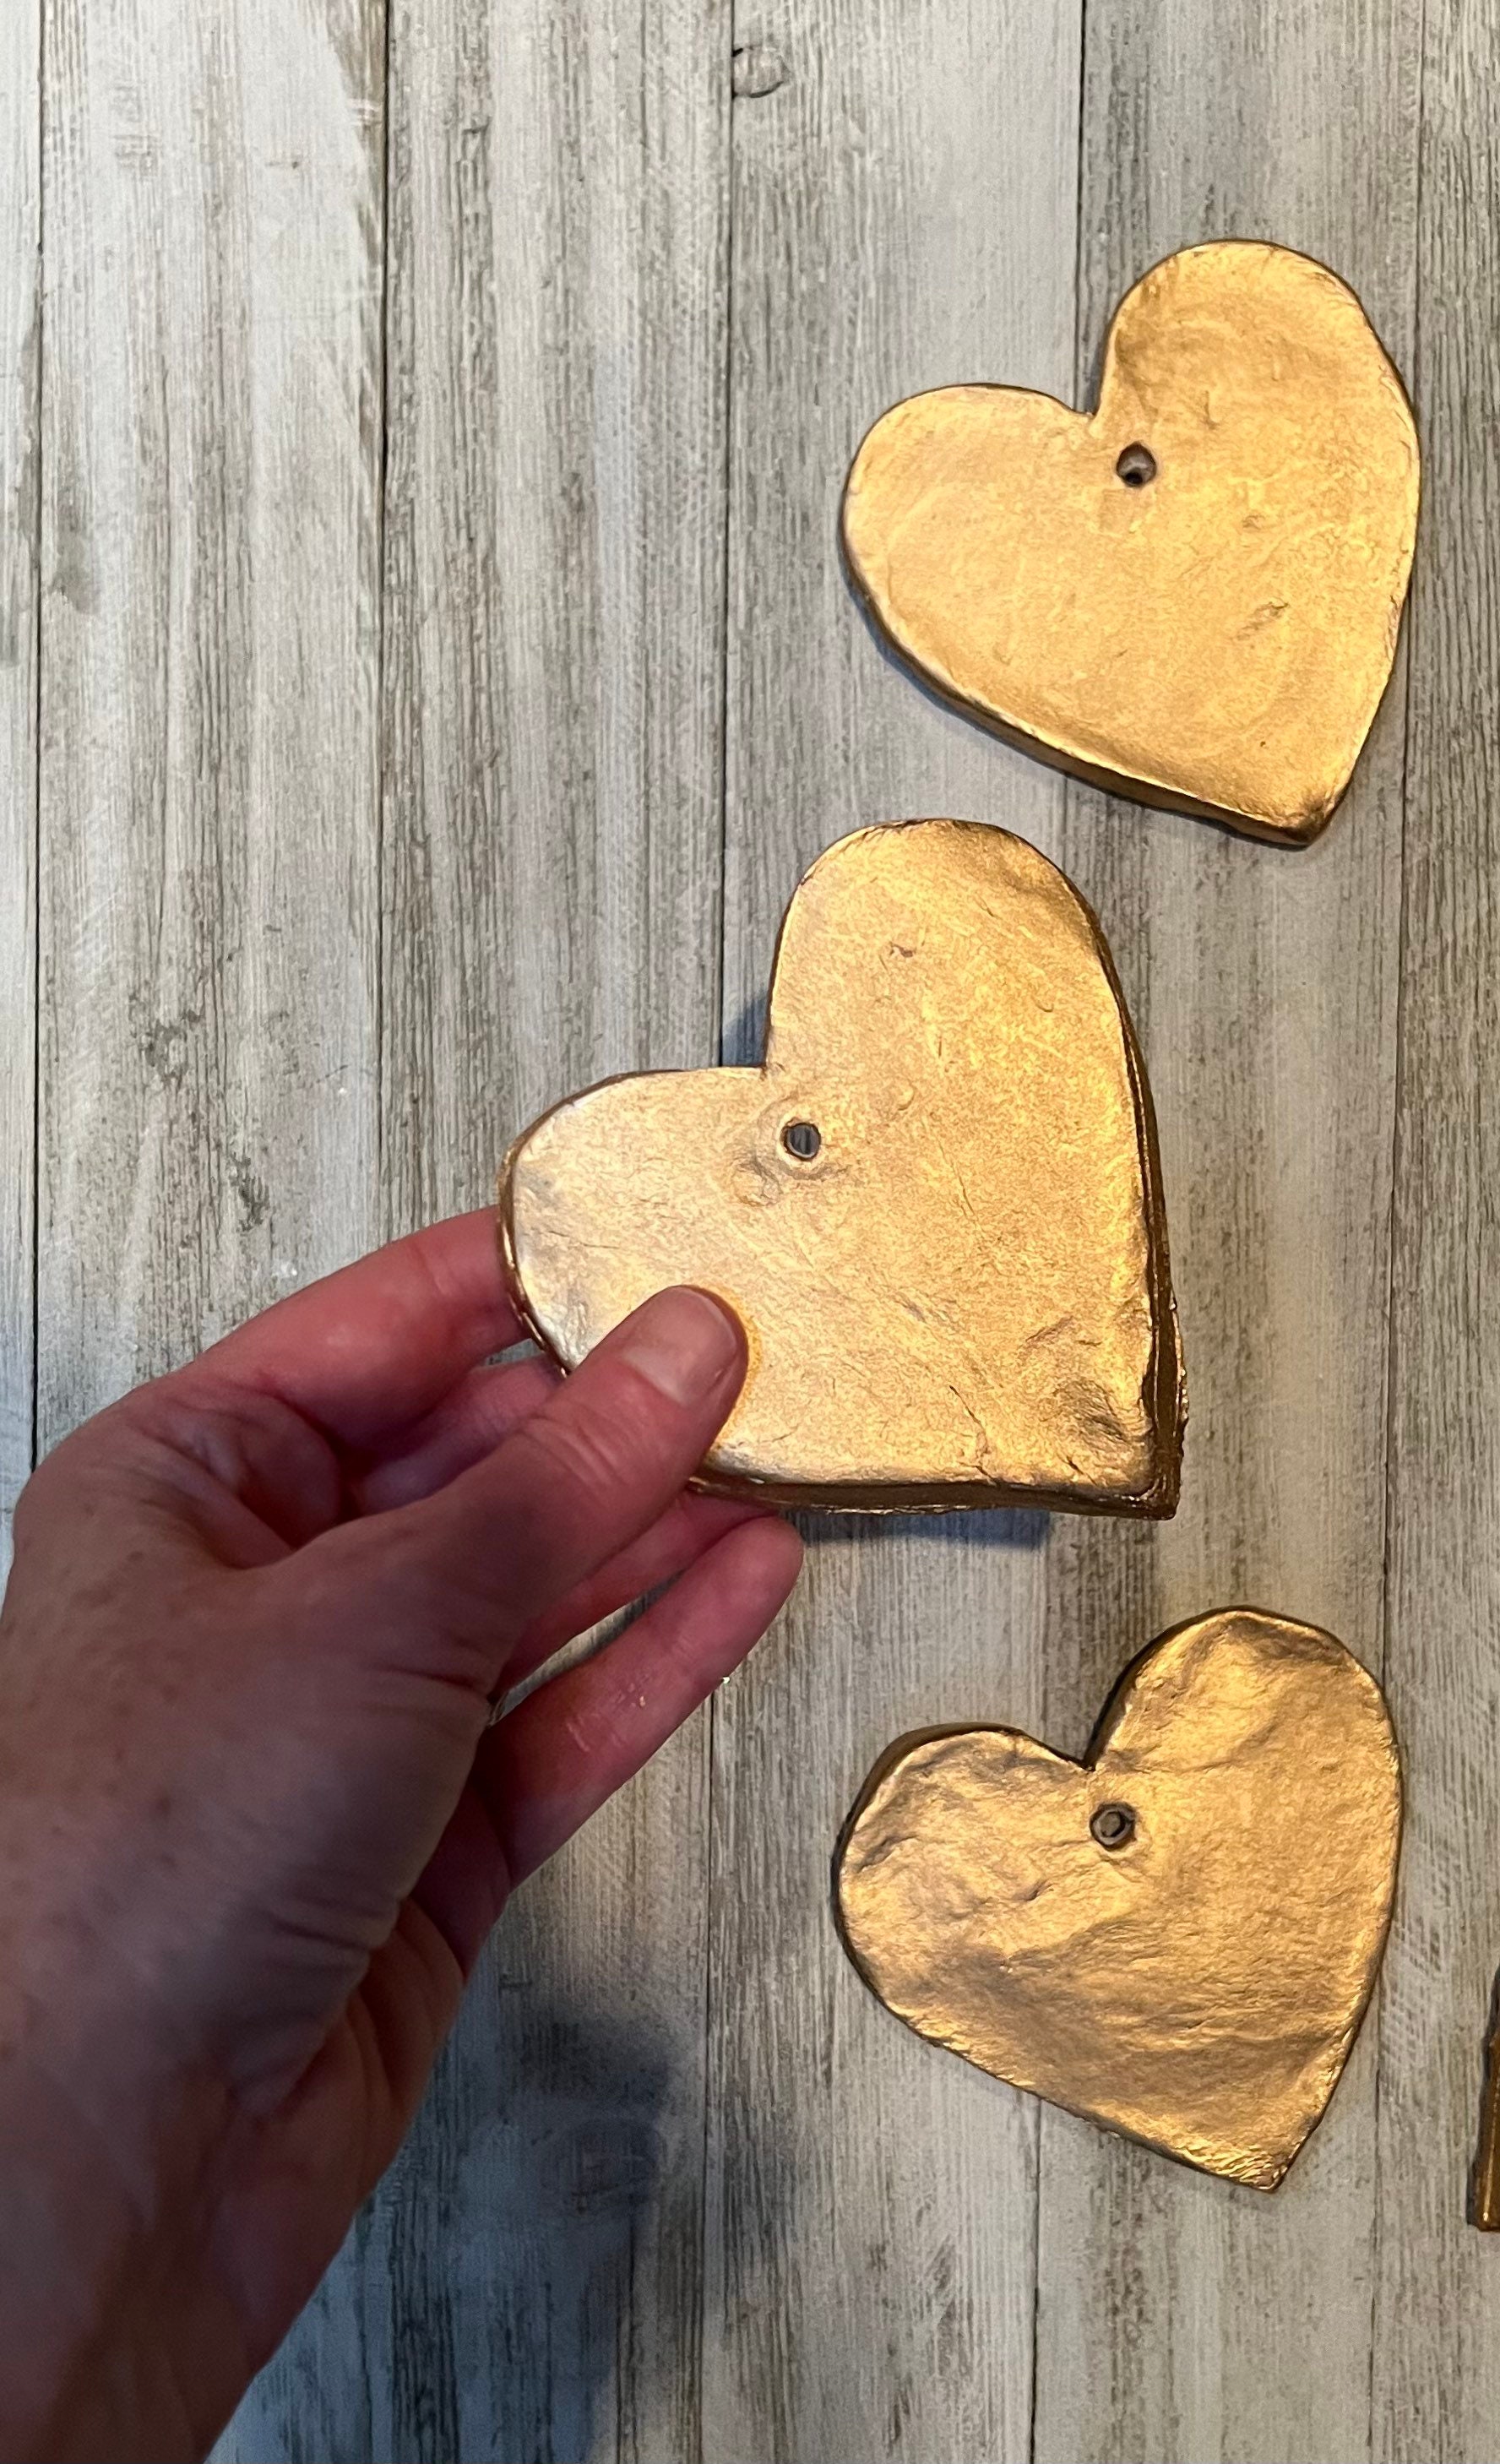 Gold Heart for Crafts, Hearts for DIY Projects, Bulk Heart Supplies for  Crafts, Heart Charm for Ornament, Heart for Garland 